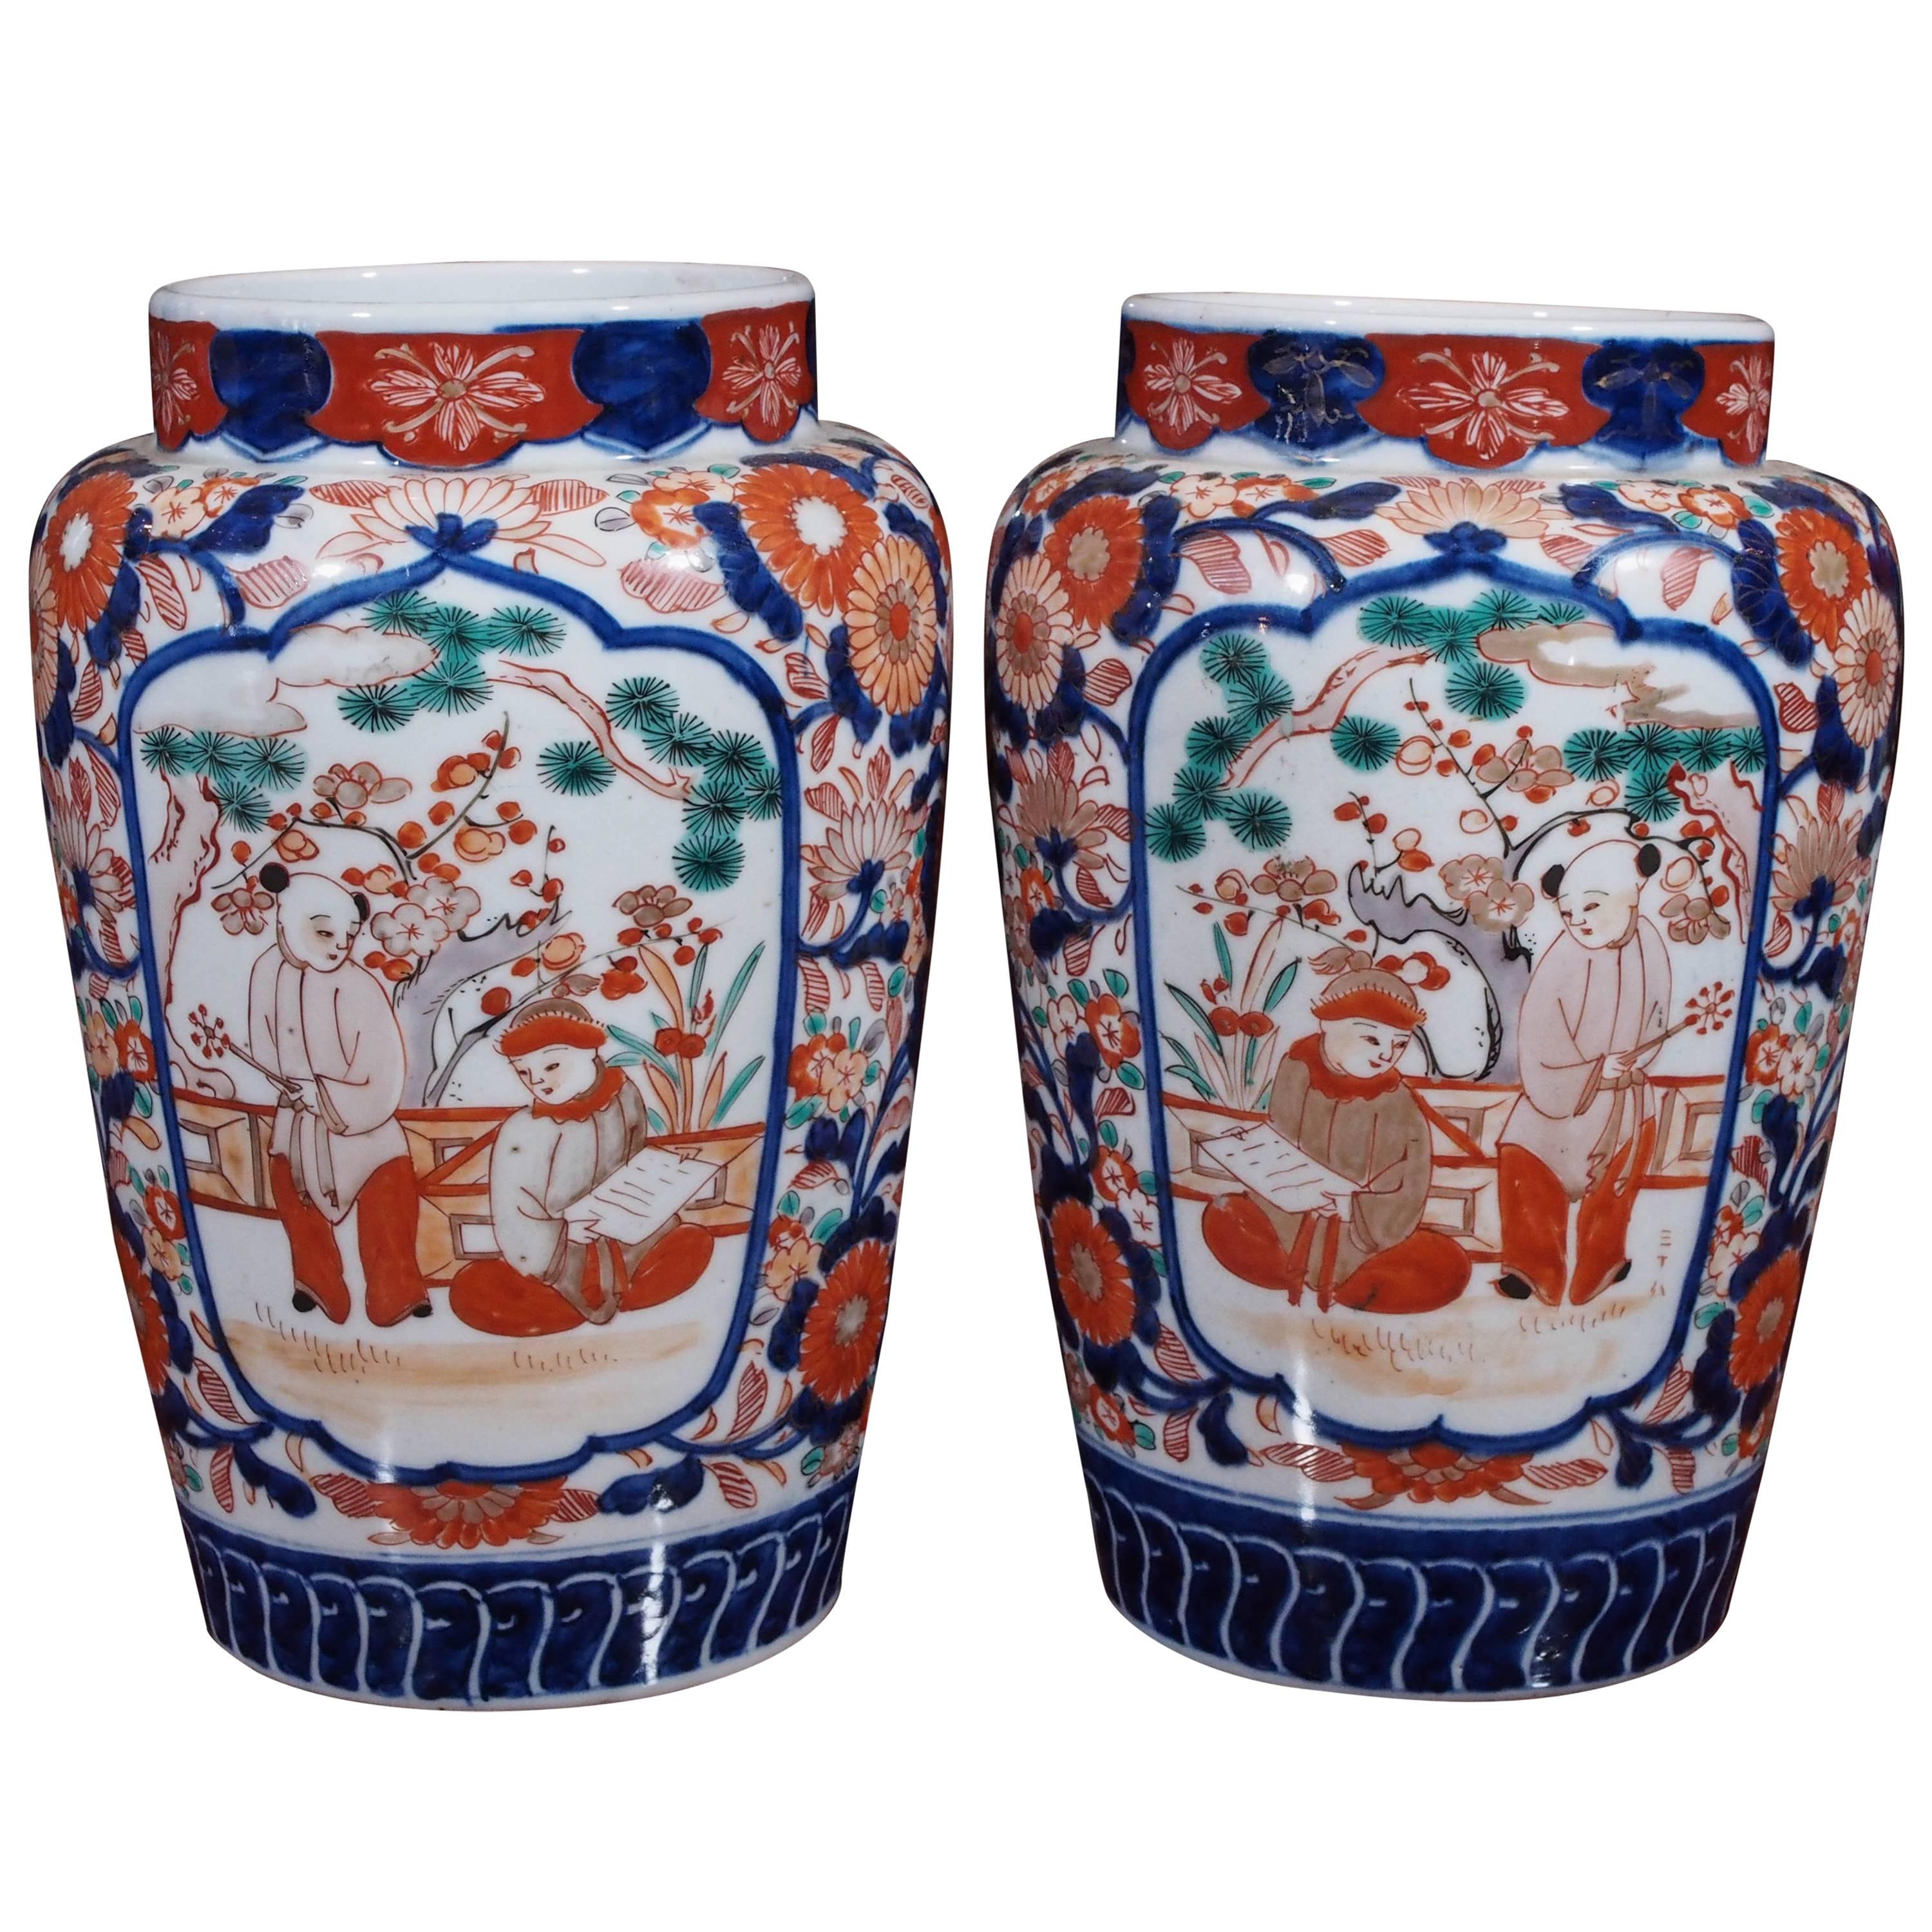 Pair of Imari Ribbed Jars with Small Boys in a Garden